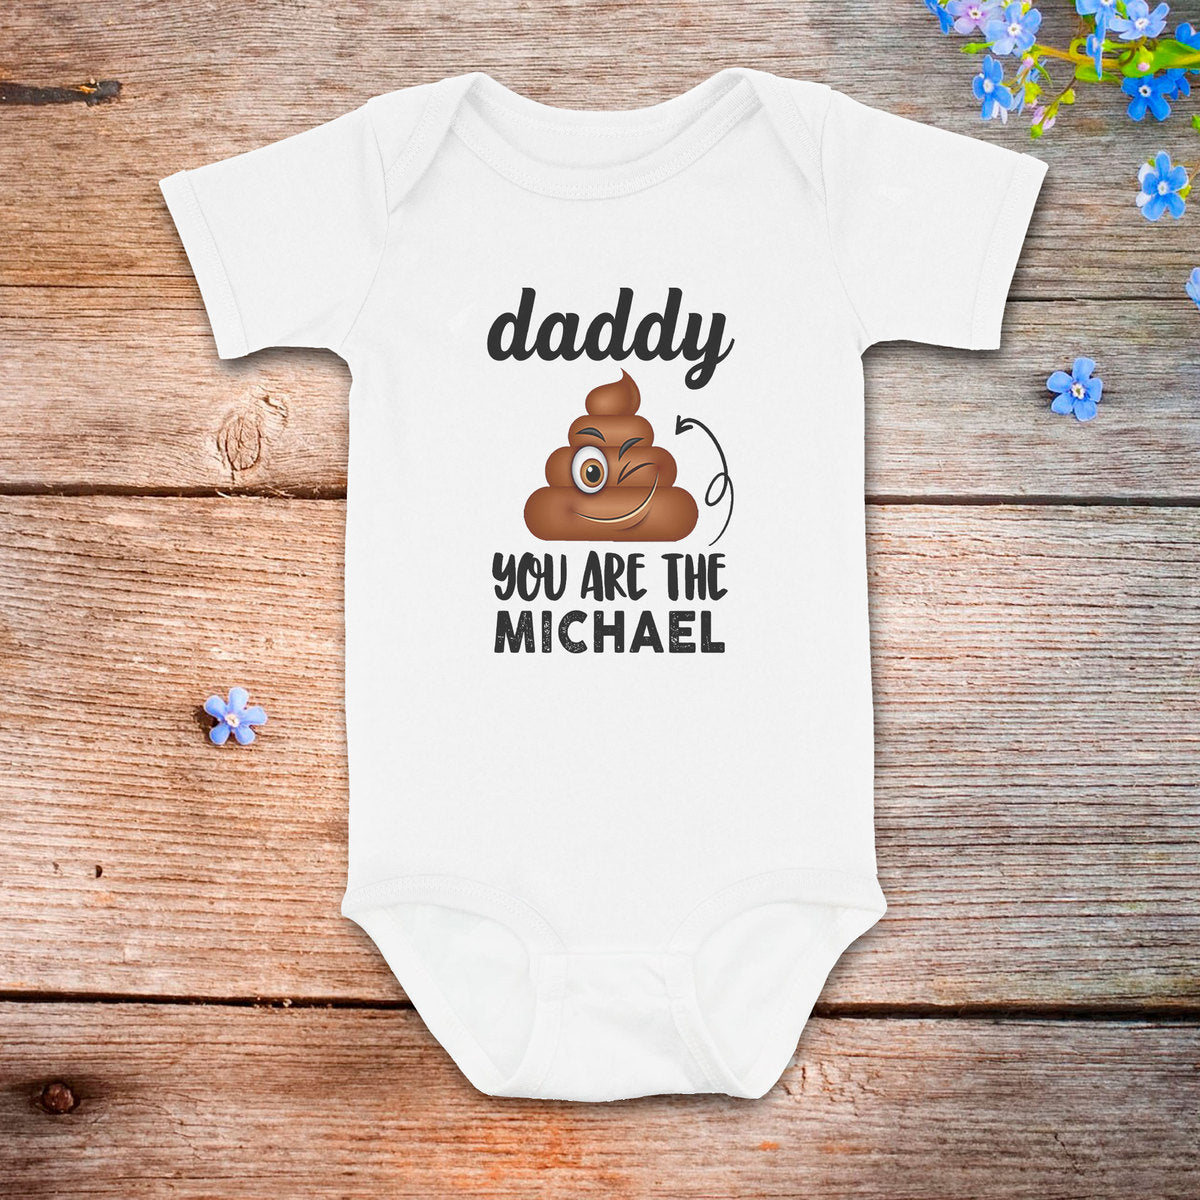 Amazon.com: Cute Cat with Heart Nose and Tail on Butt of Baby Onesies  Bodysuit Newborn Ideas: Clothing, Shoes & Jewelry